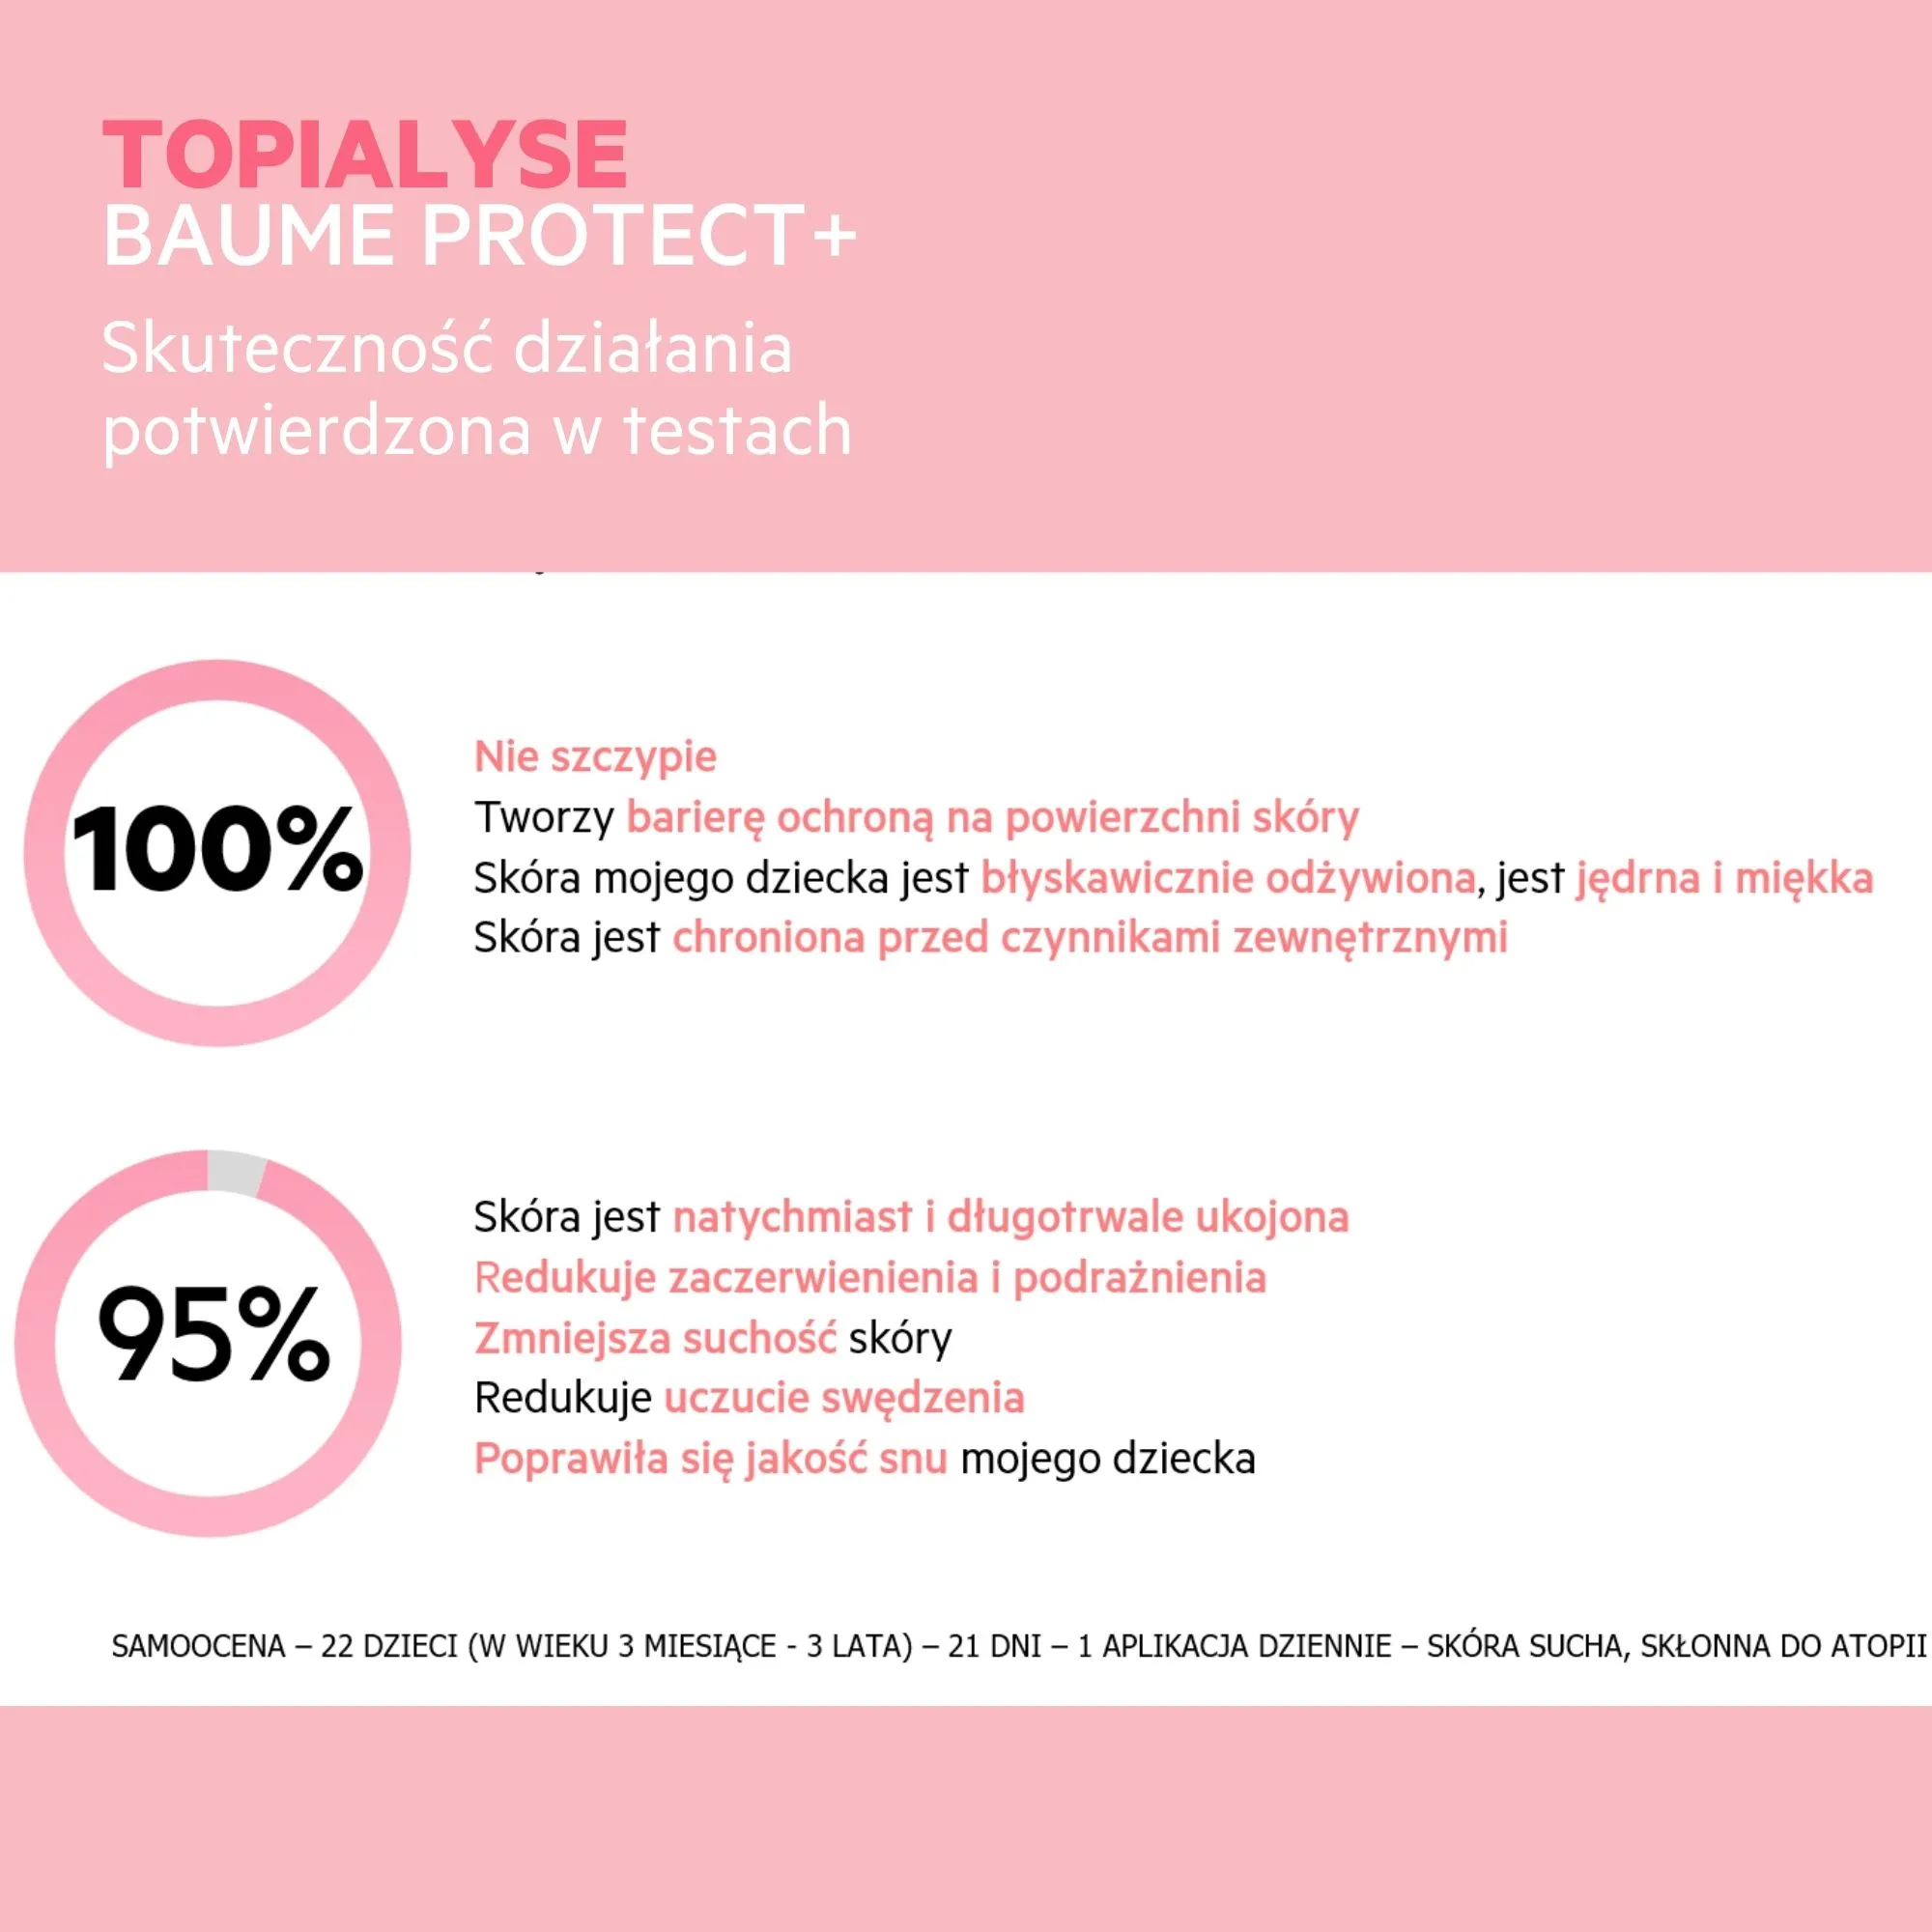 SVR Topialyse Baume Protect+, balsam, 400 ml 